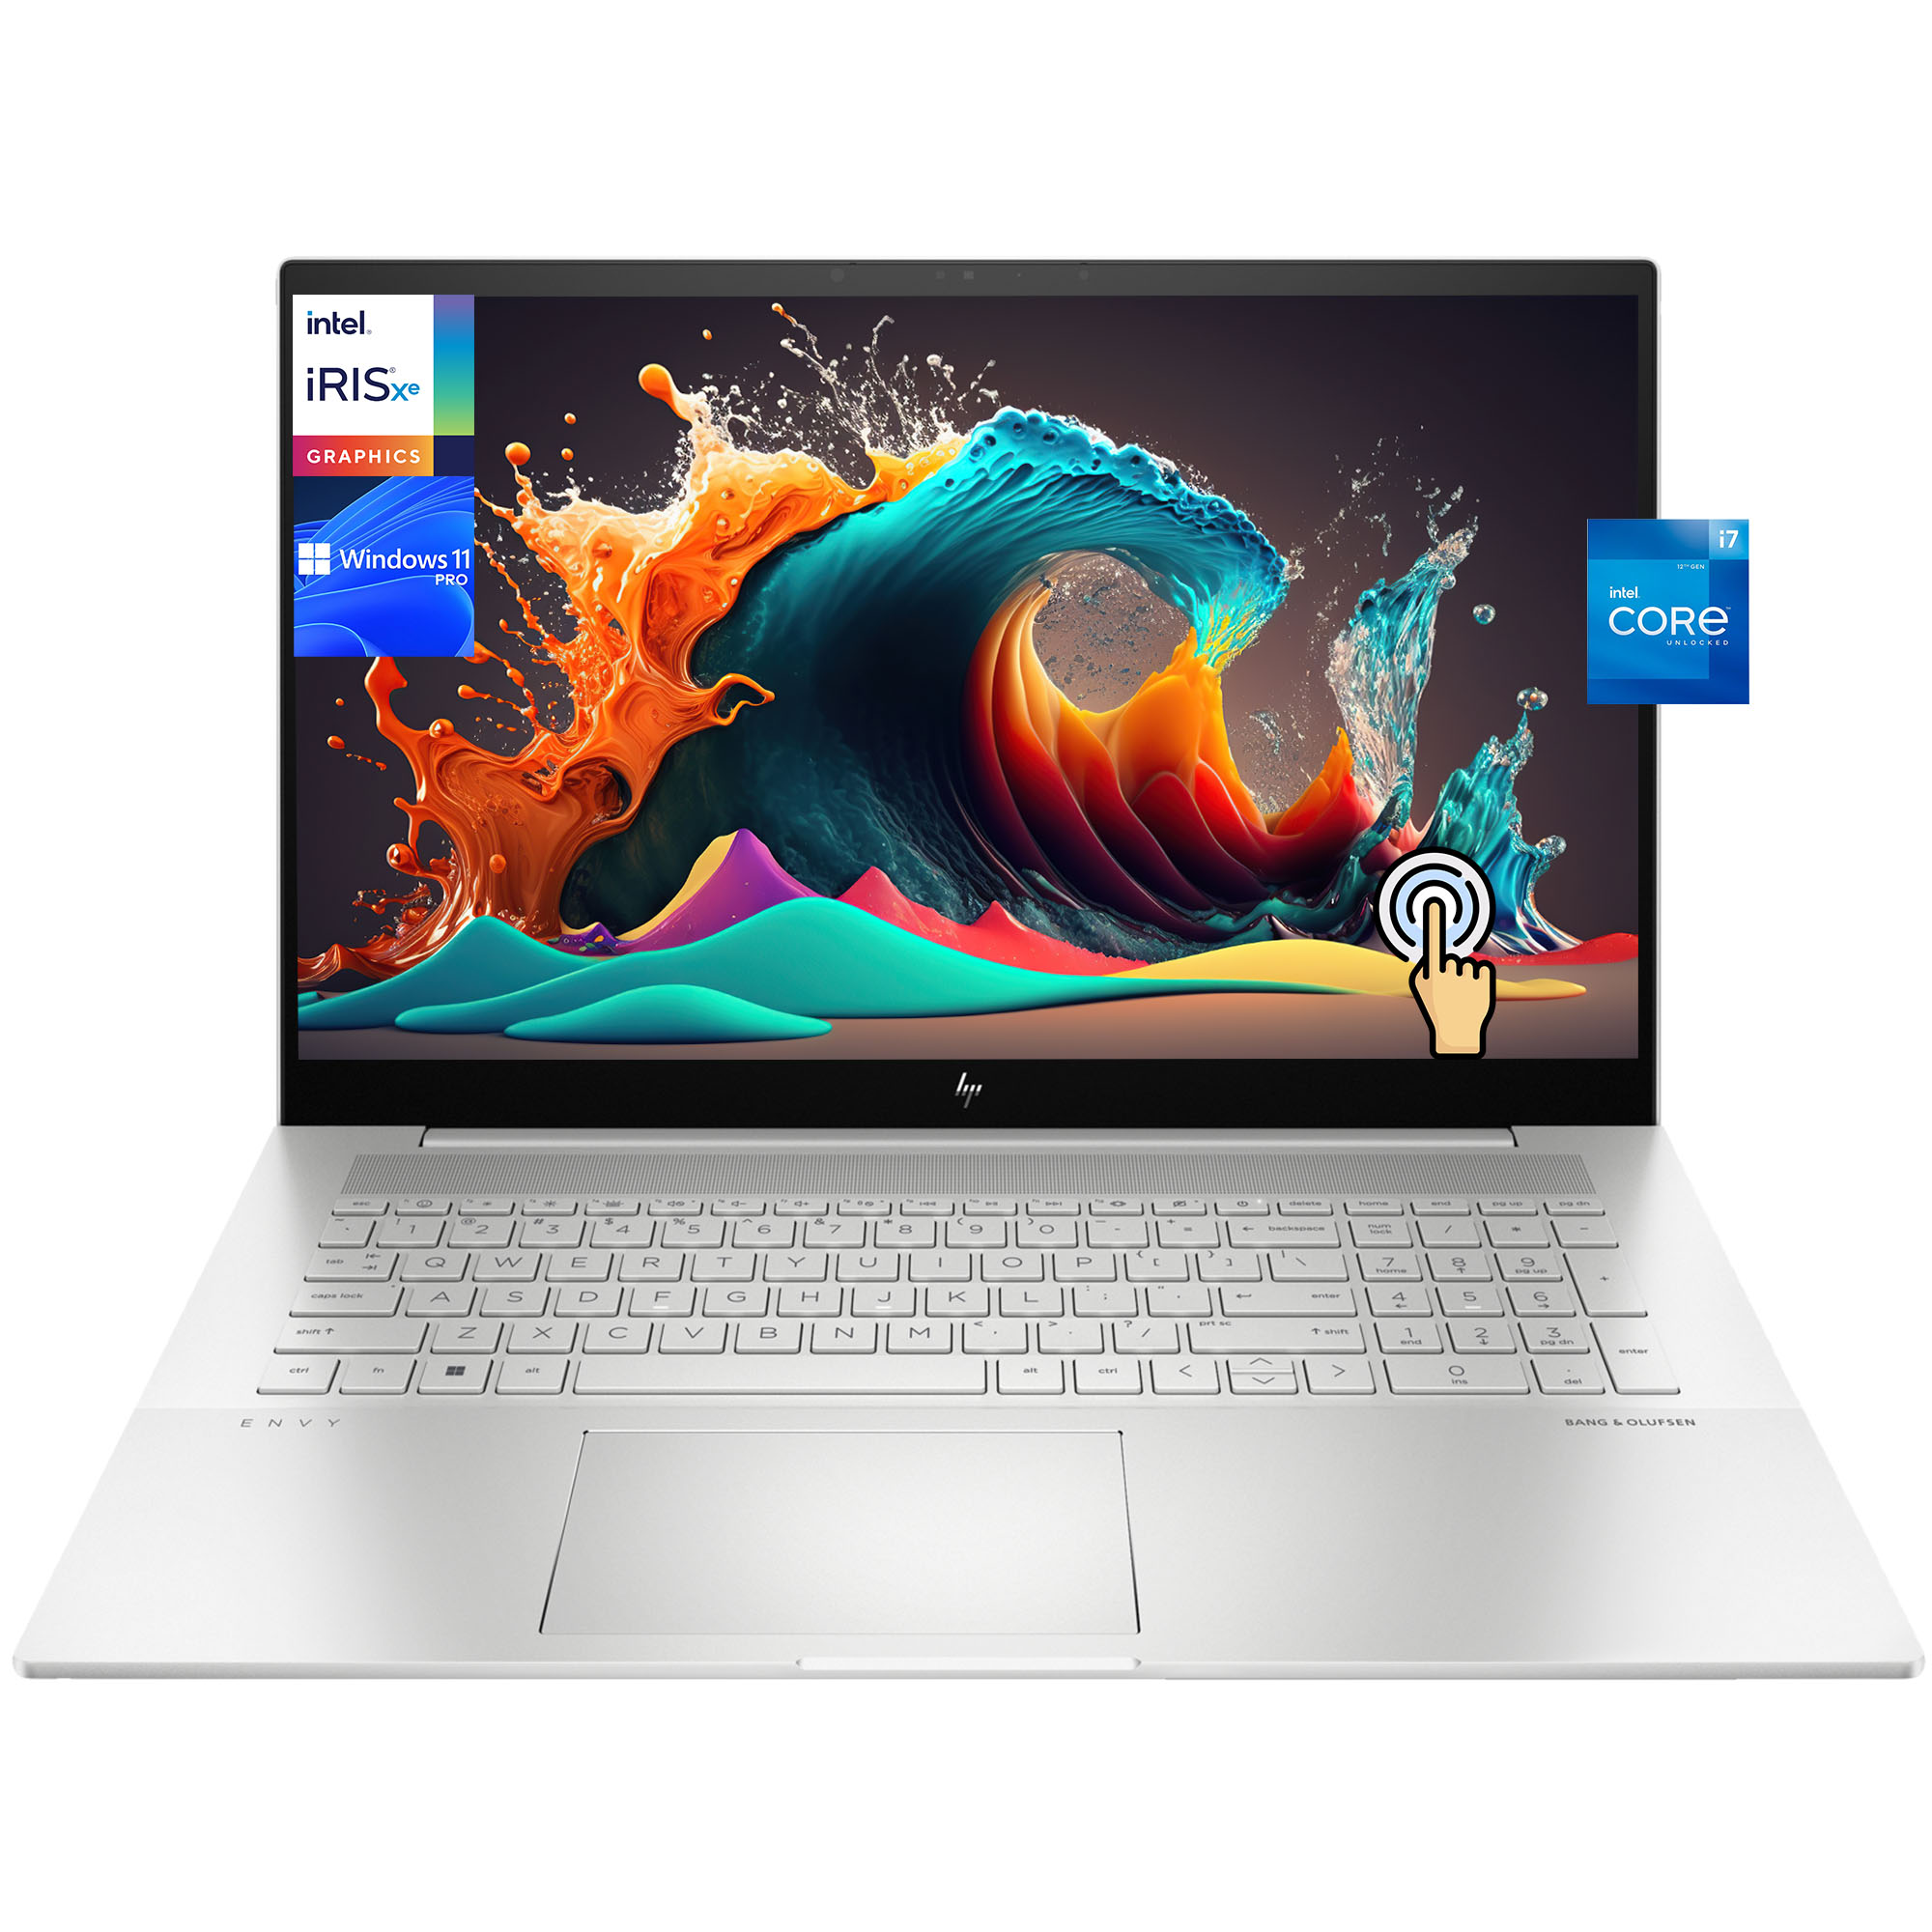 HP Envy 17 17.3" FHD Touchscreen [Windows 11 Pro] Business Laptop, Intel 12-Core i7-1260P, 32GB DDRR4 RAM, 2TB PCIe SSD, Iris Xe Graphic, Backlit KB, Wi-Fi6, Bluetooth 5.3, w/Office Accessories - image 1 of 6